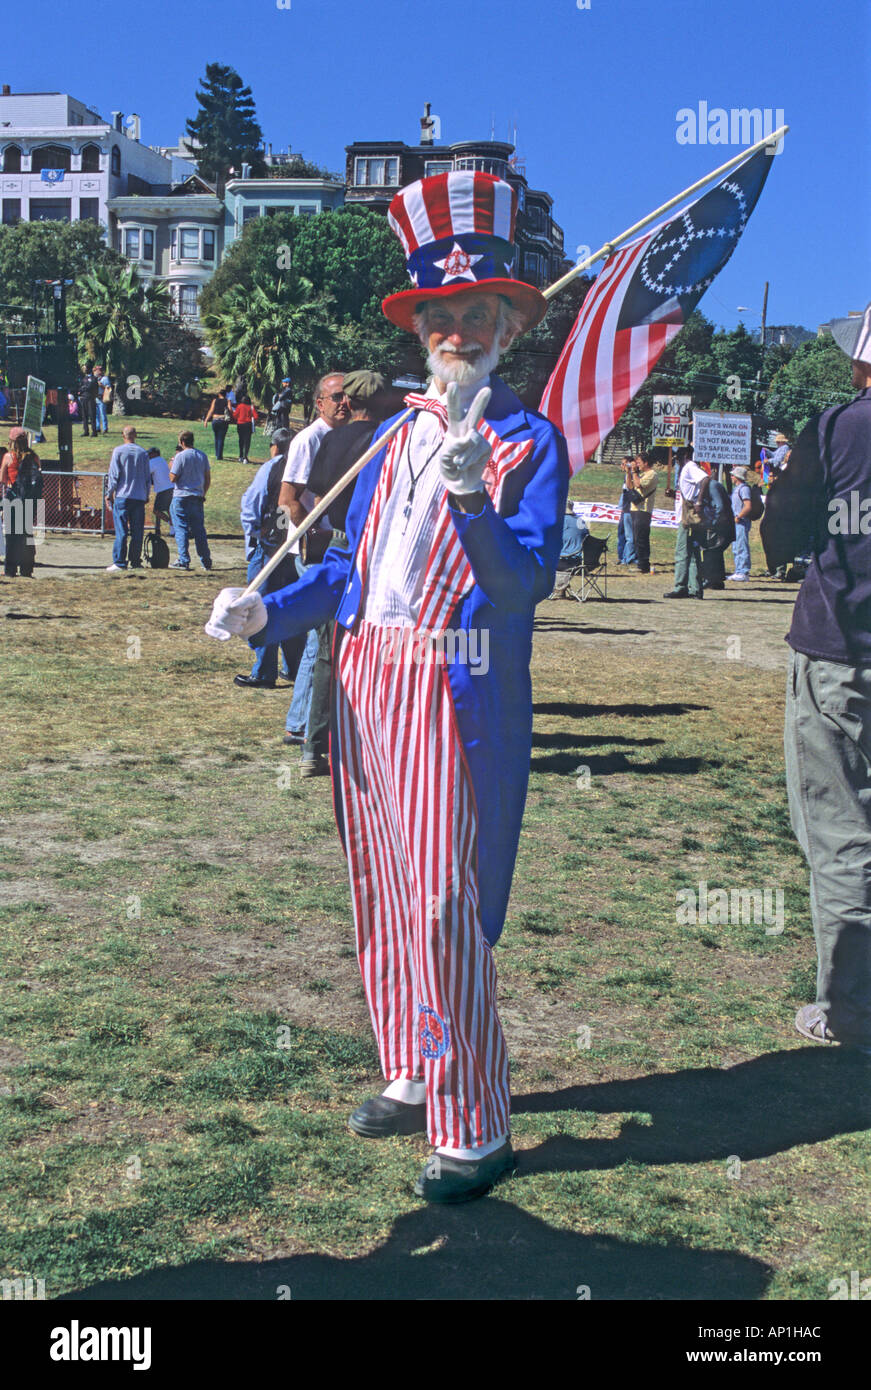 'Elderly man dressed as 'Uncle Sam' for Peace at an 'Anti War' Rally, San Francisco' Stock Photo